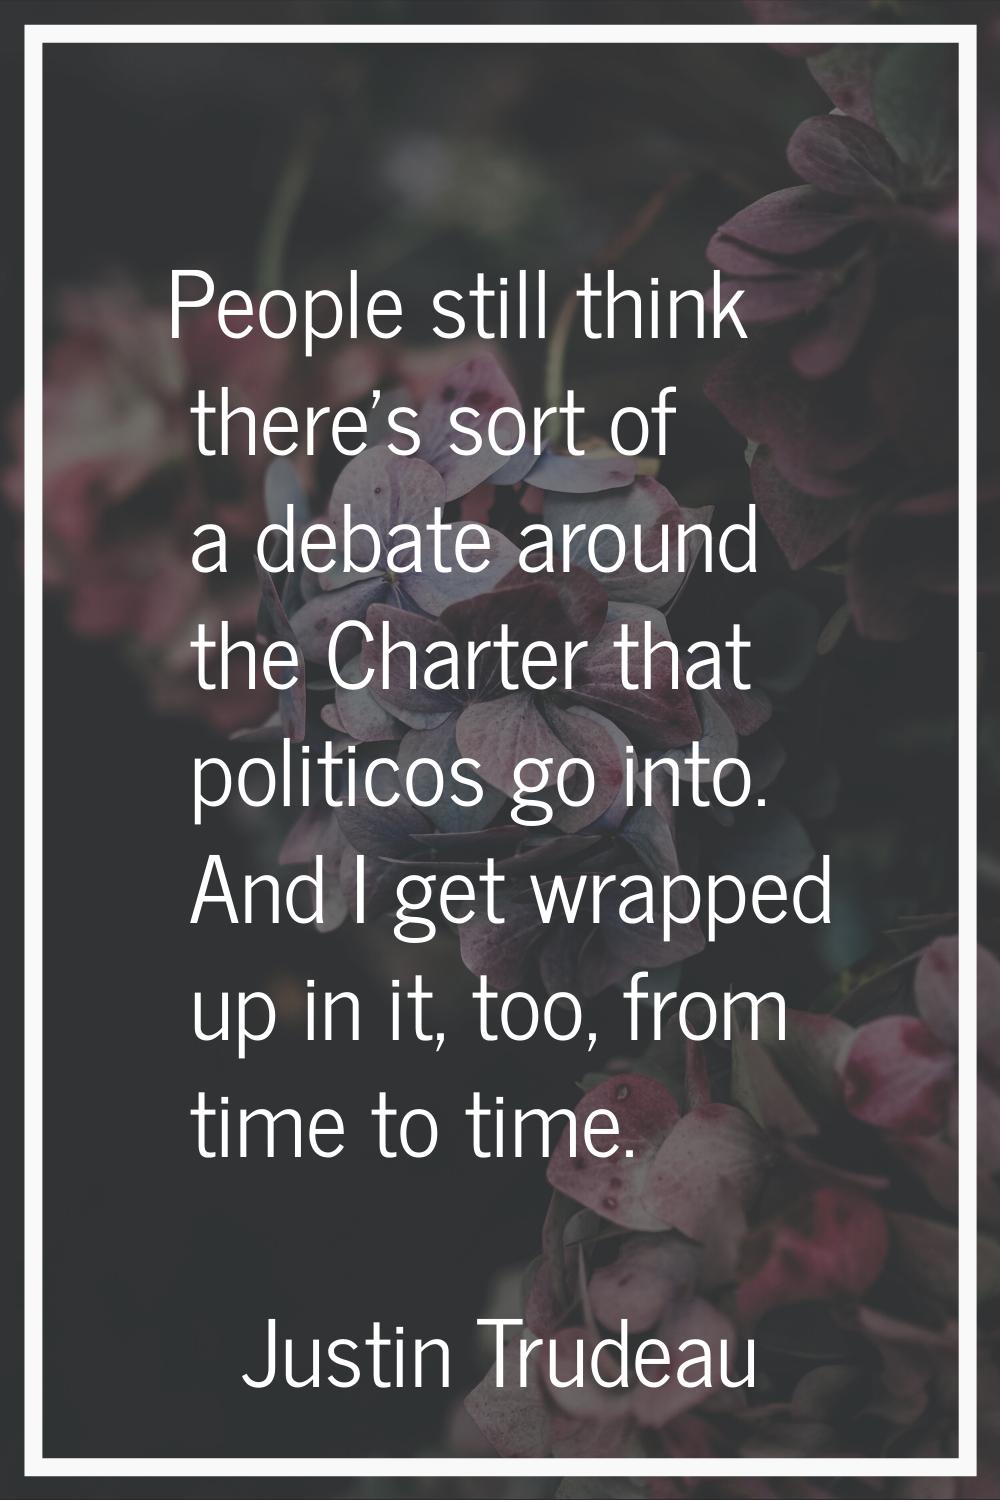 People still think there's sort of a debate around the Charter that politicos go into. And I get wr